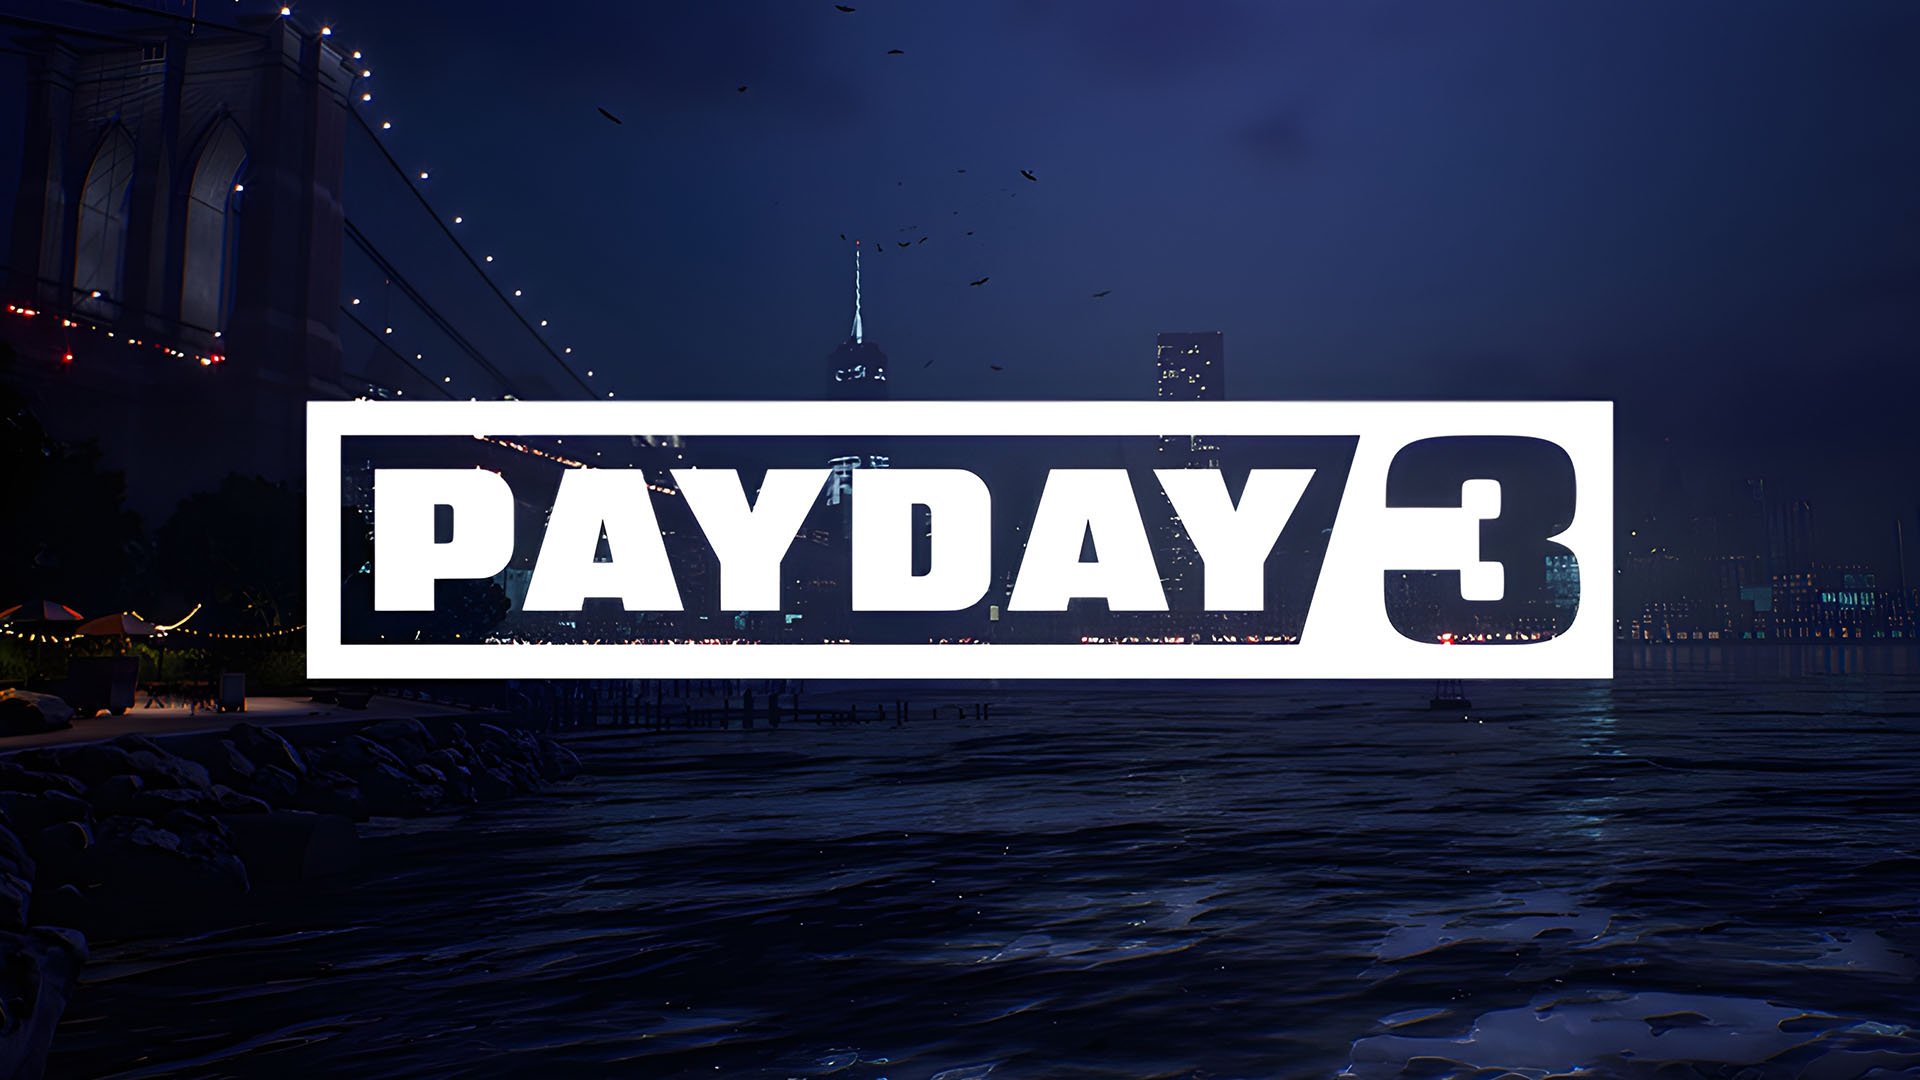 Payday 3 will launch in 2023, here's your first look